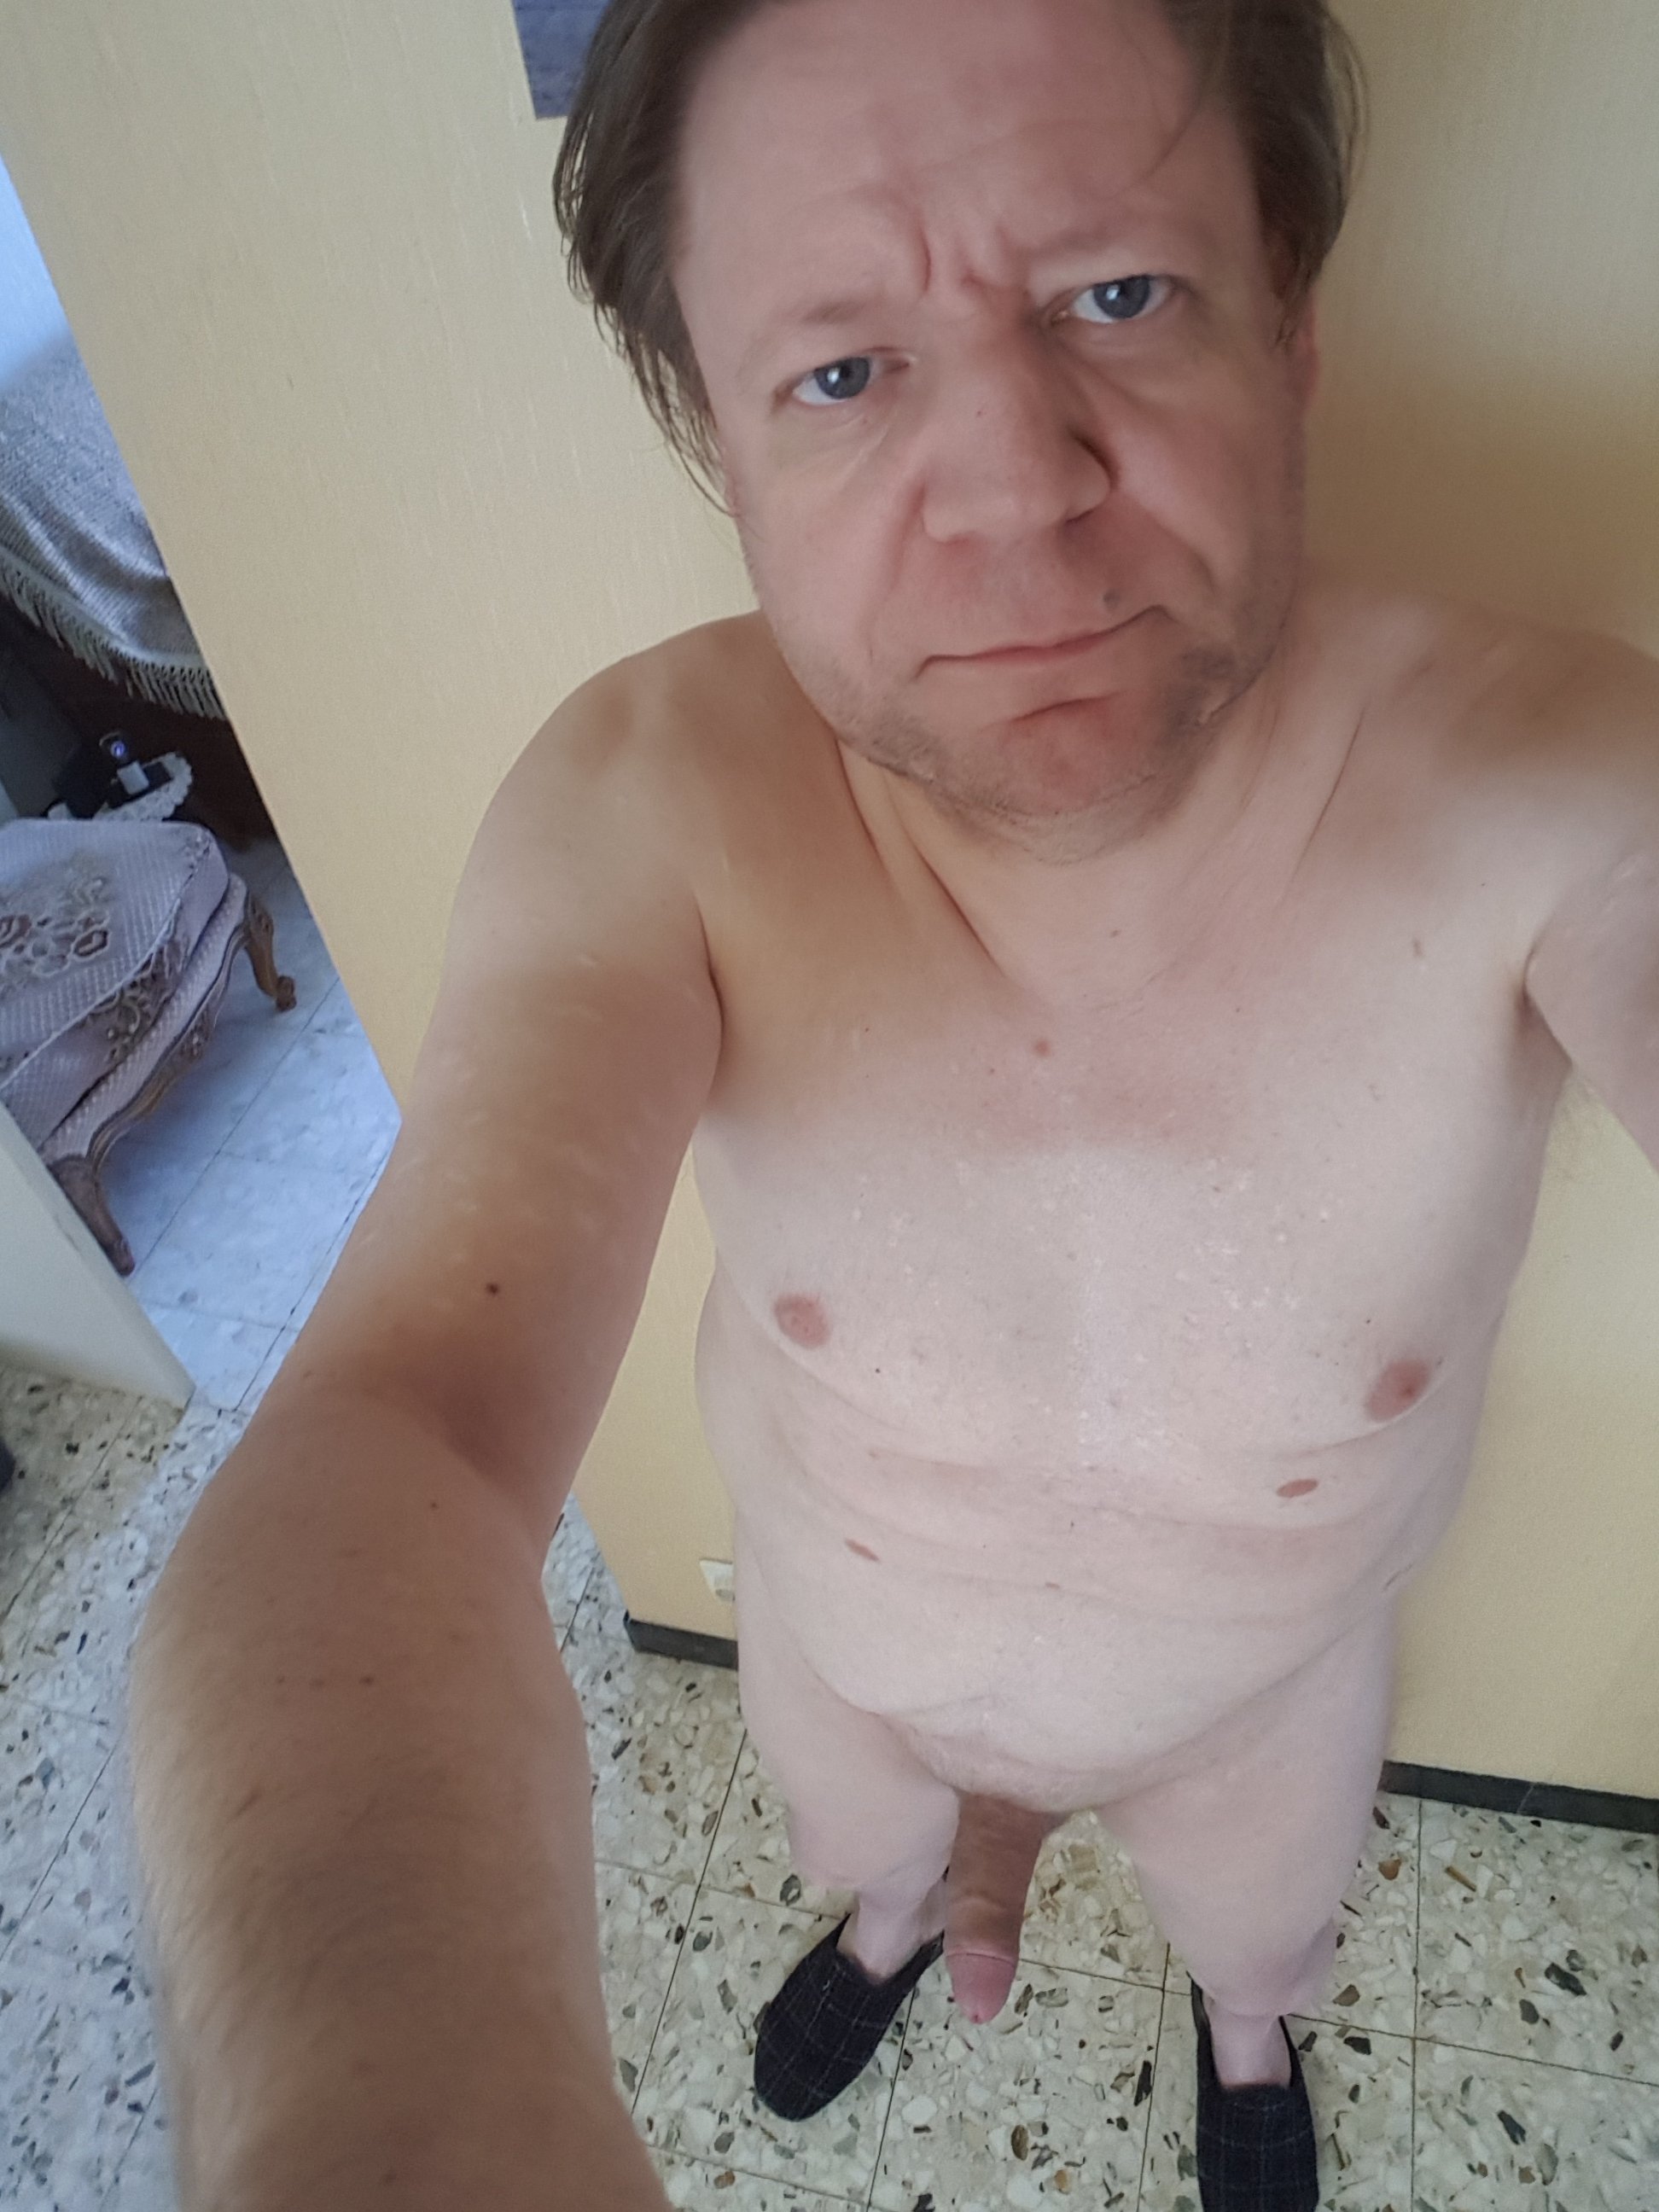 Me naked (1/1)